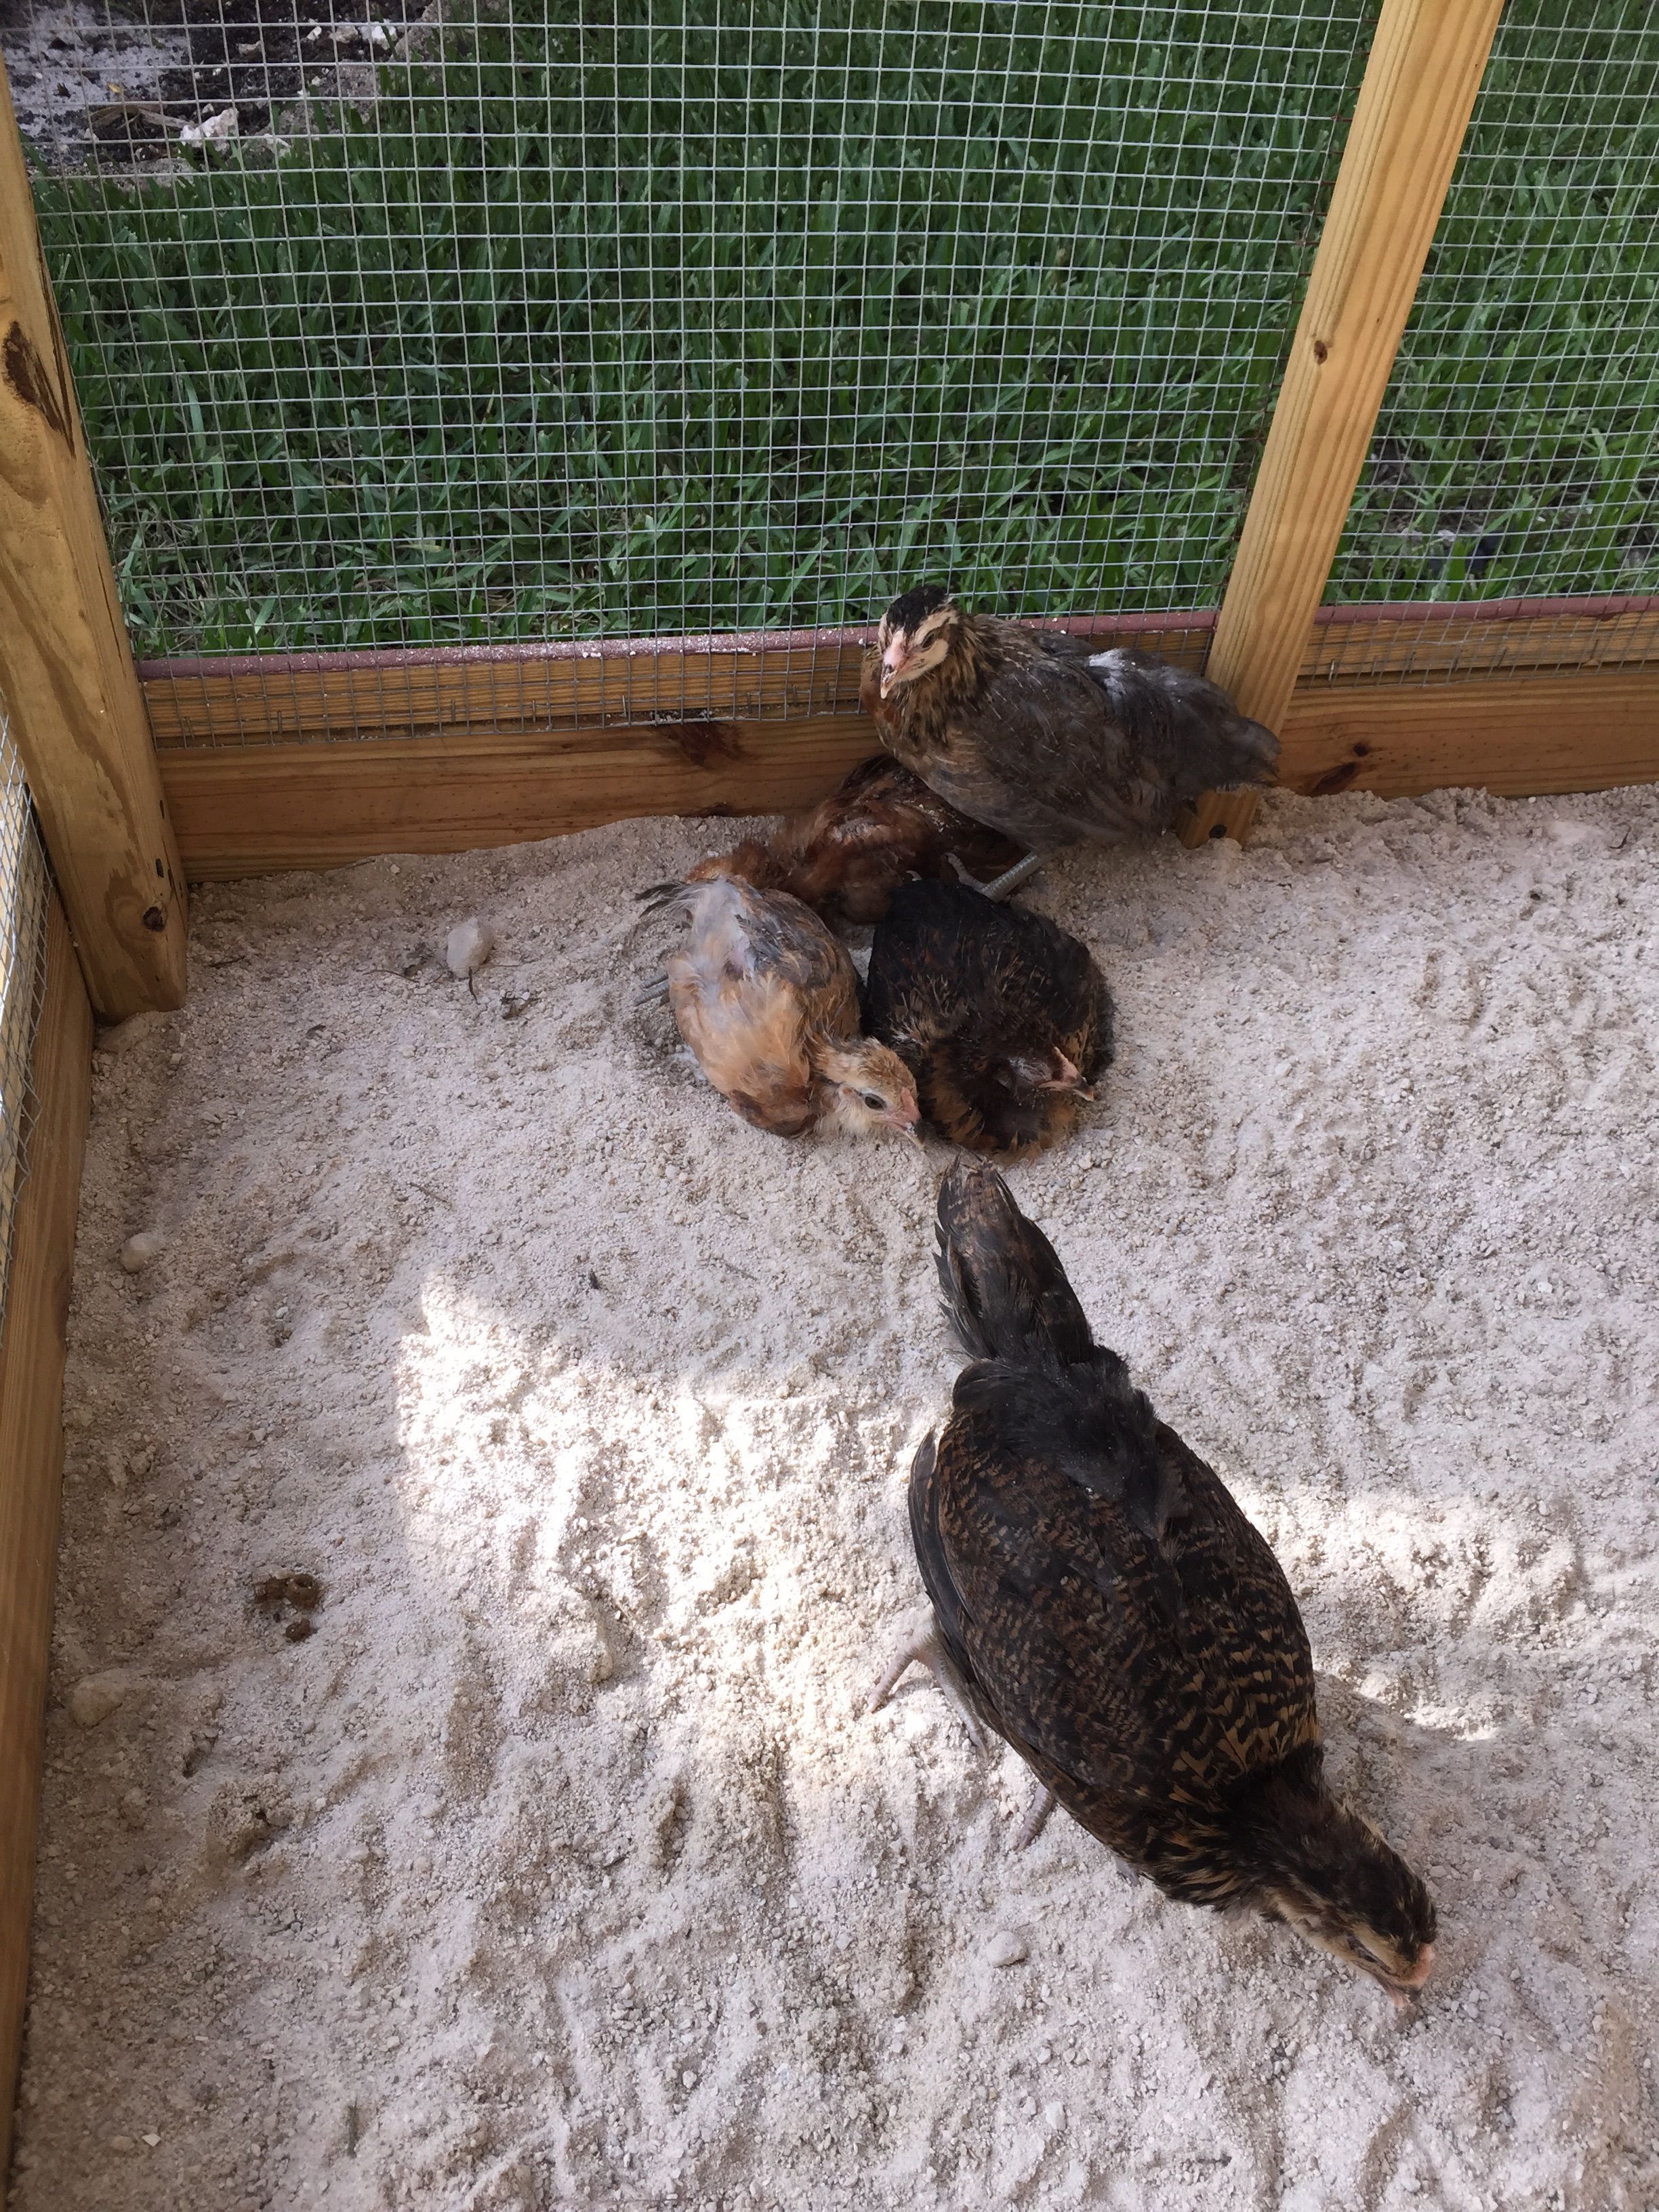 My chicks having a dustbath for the firsttime after switching to sand they love it....!